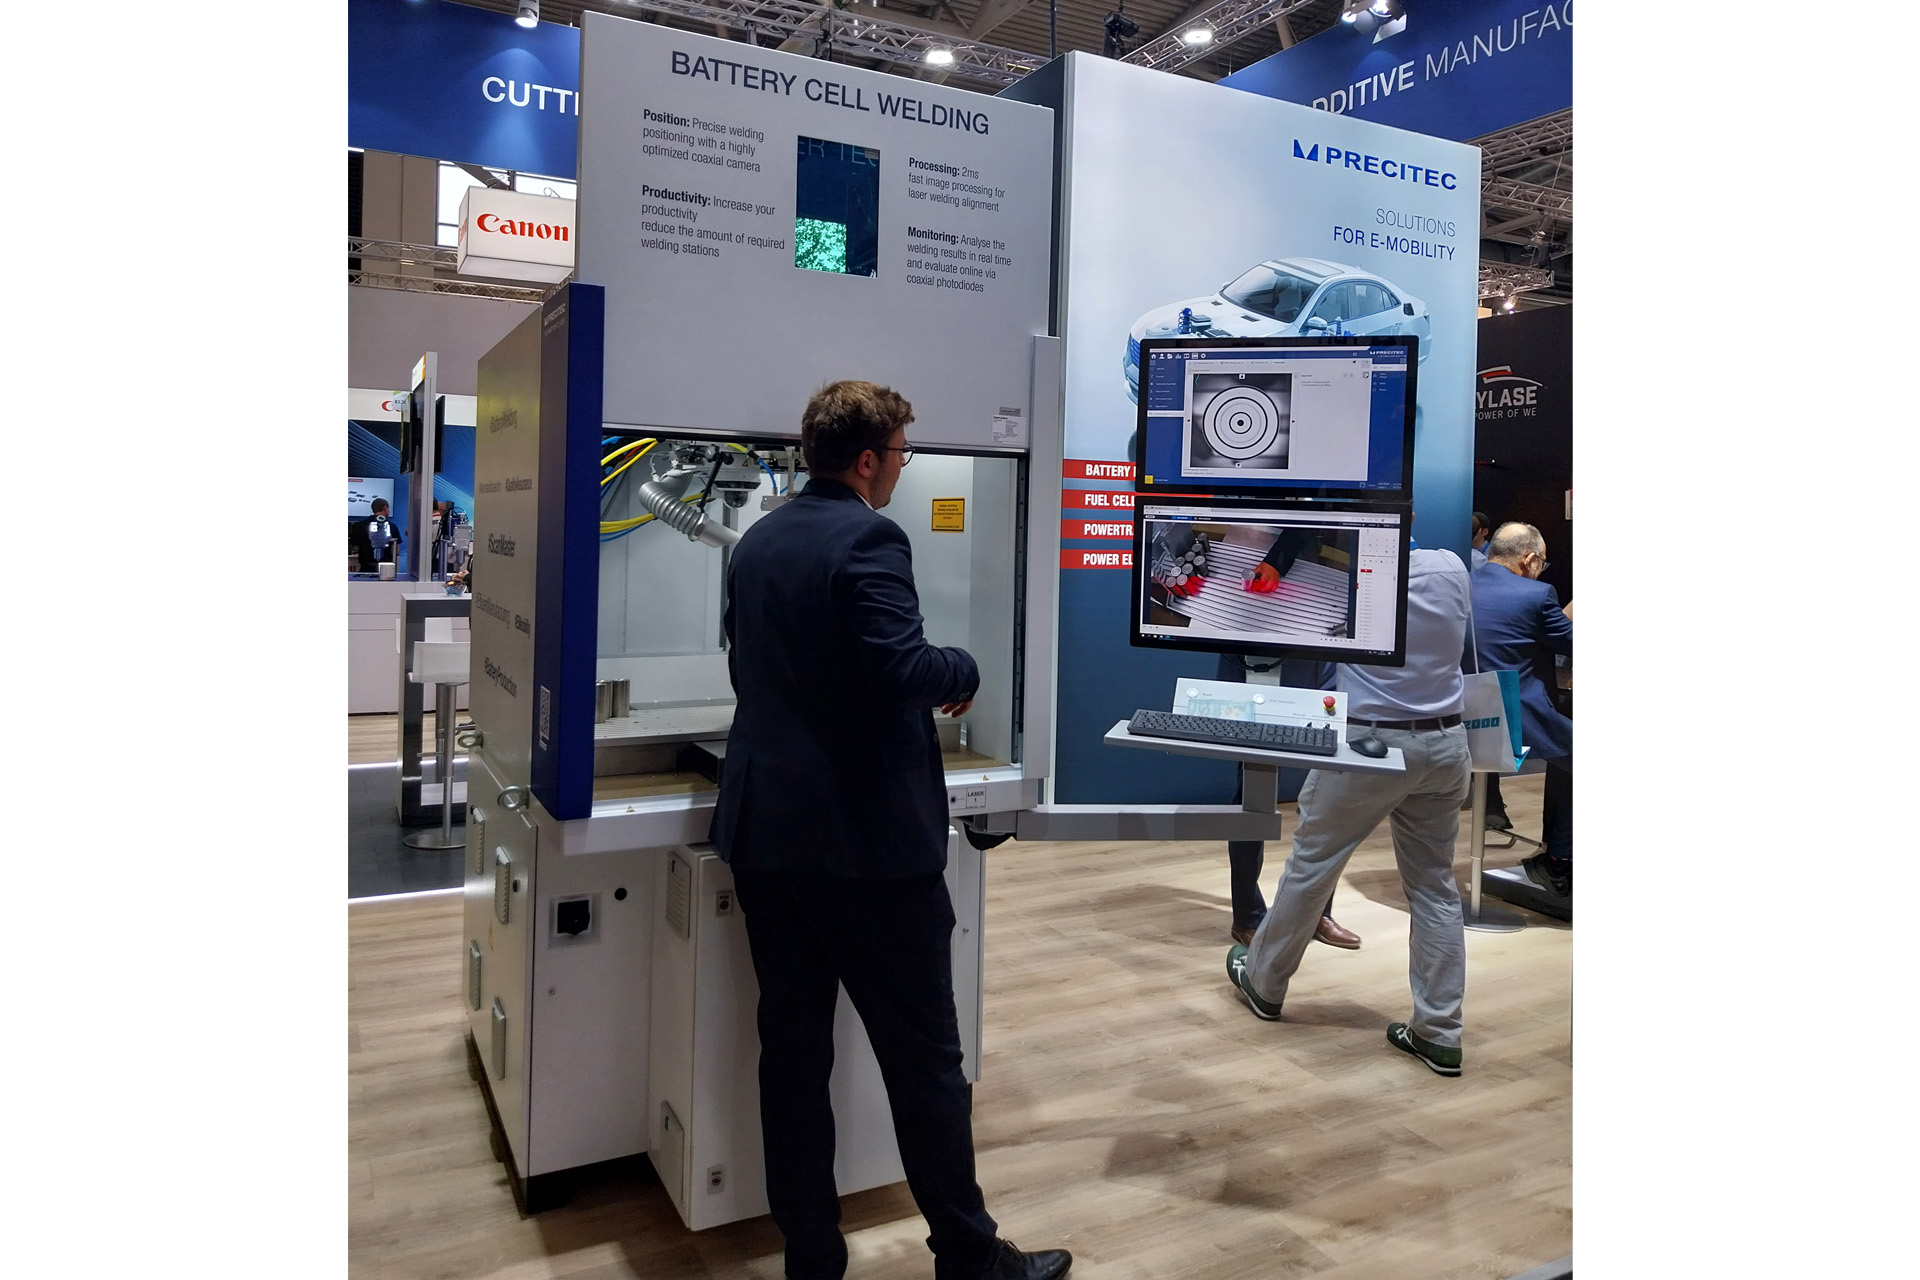 Precitec presented the ScanMaster for laser welding of battery cells at Laser World of Photonics